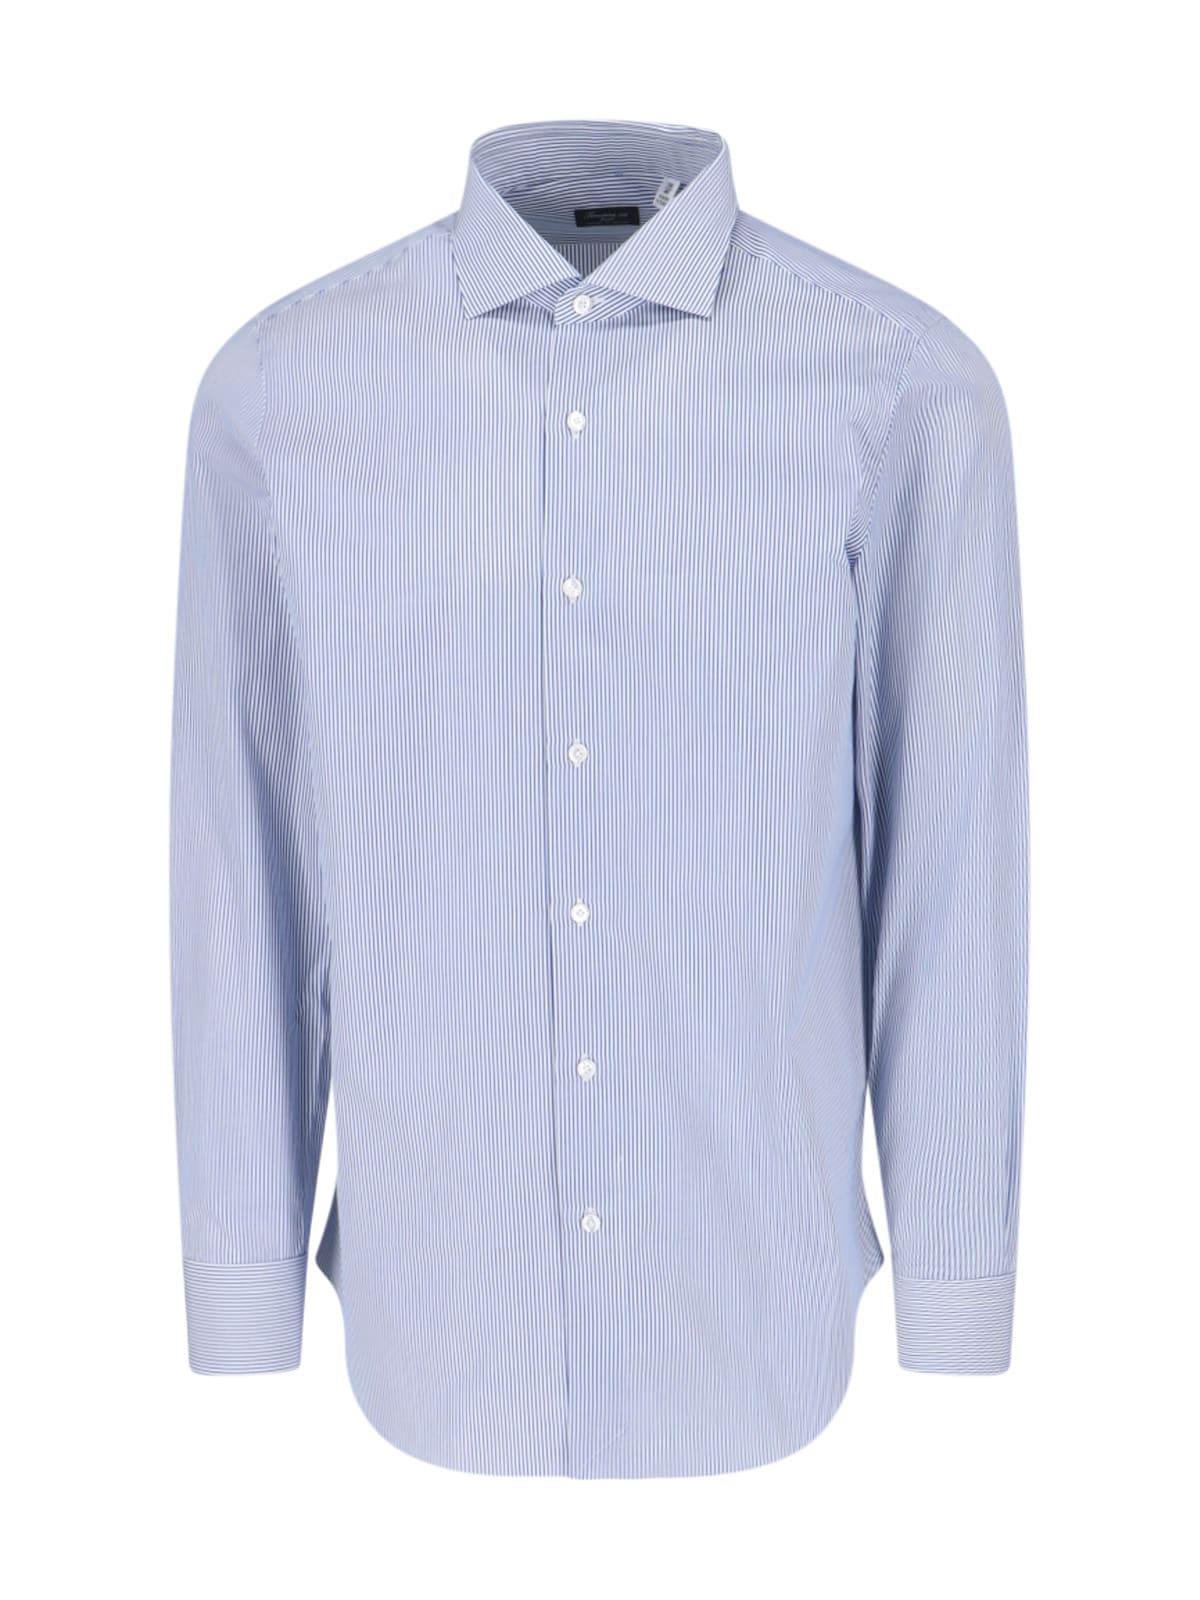 Finamore Striped Shirt In Light Blue